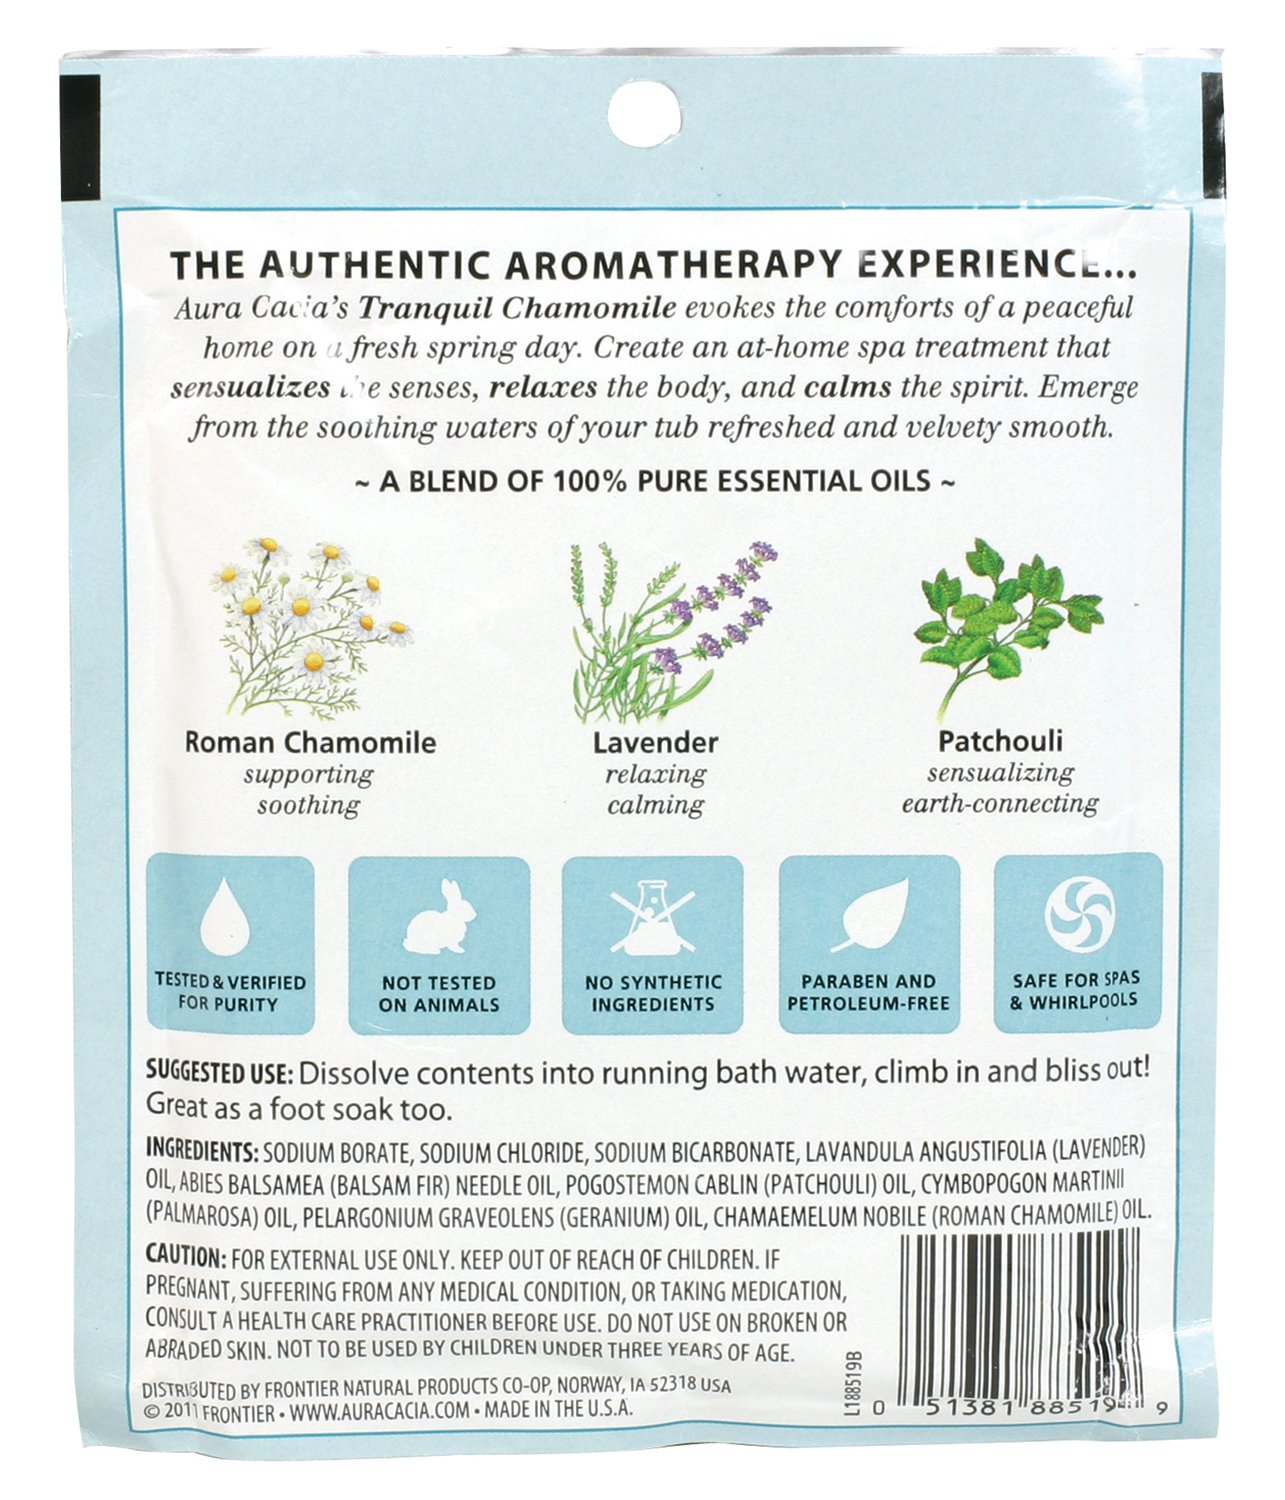 Aura Cacia Aromatherapy Mineral Bath, Tranquil Chamomile, 2.5 ounce packet (Pack of 3)